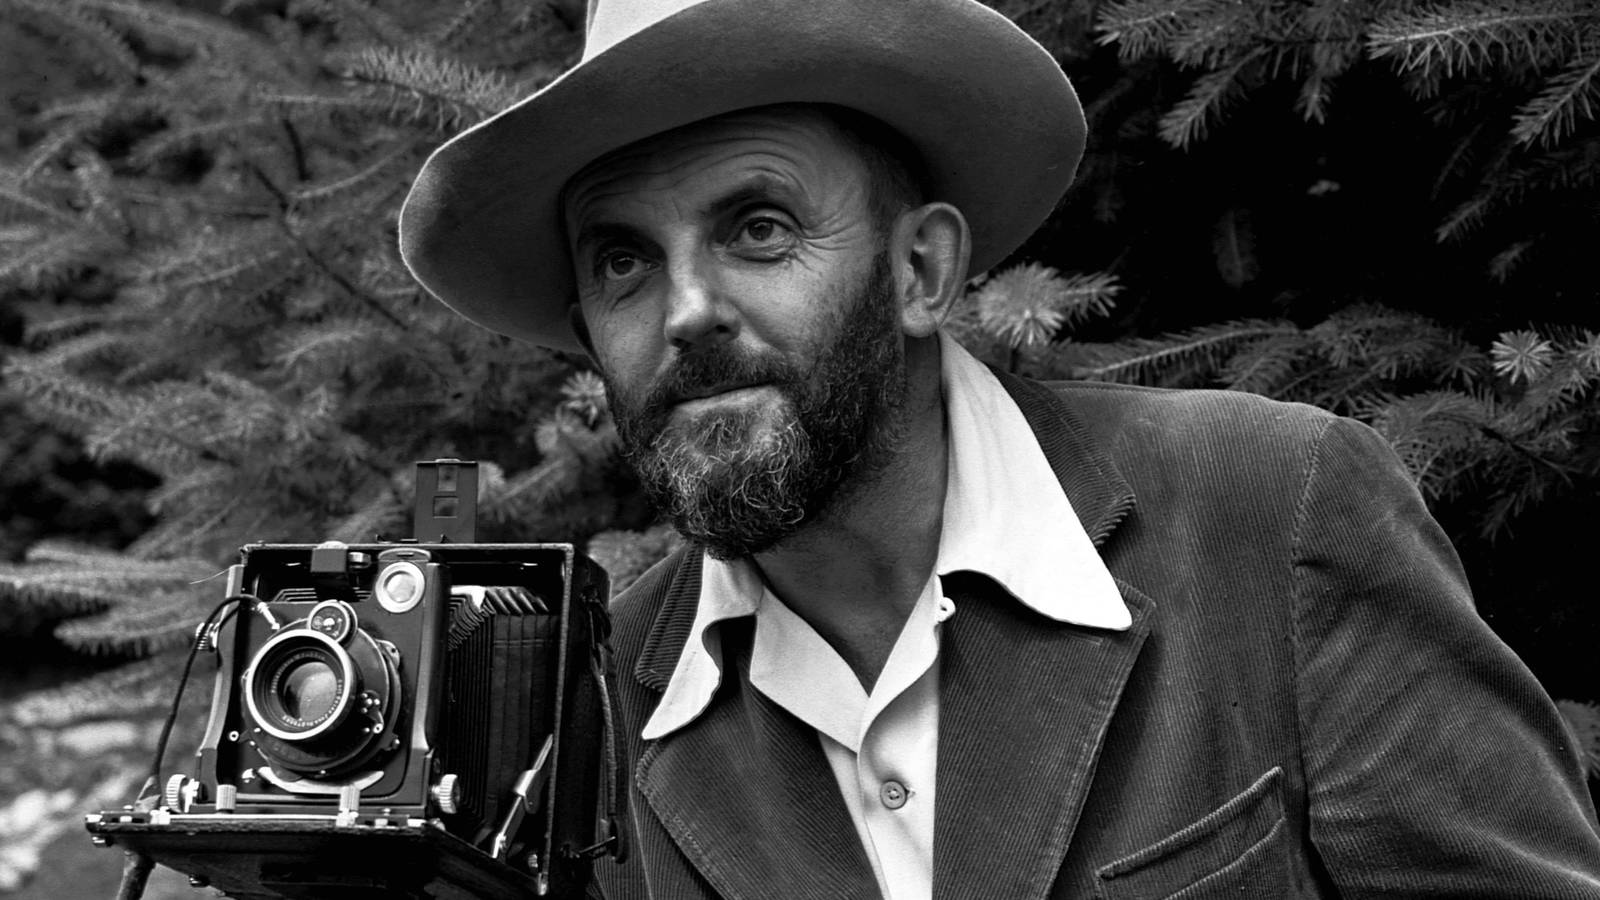 Ansel Adams Photography His style, technique, and innovation.